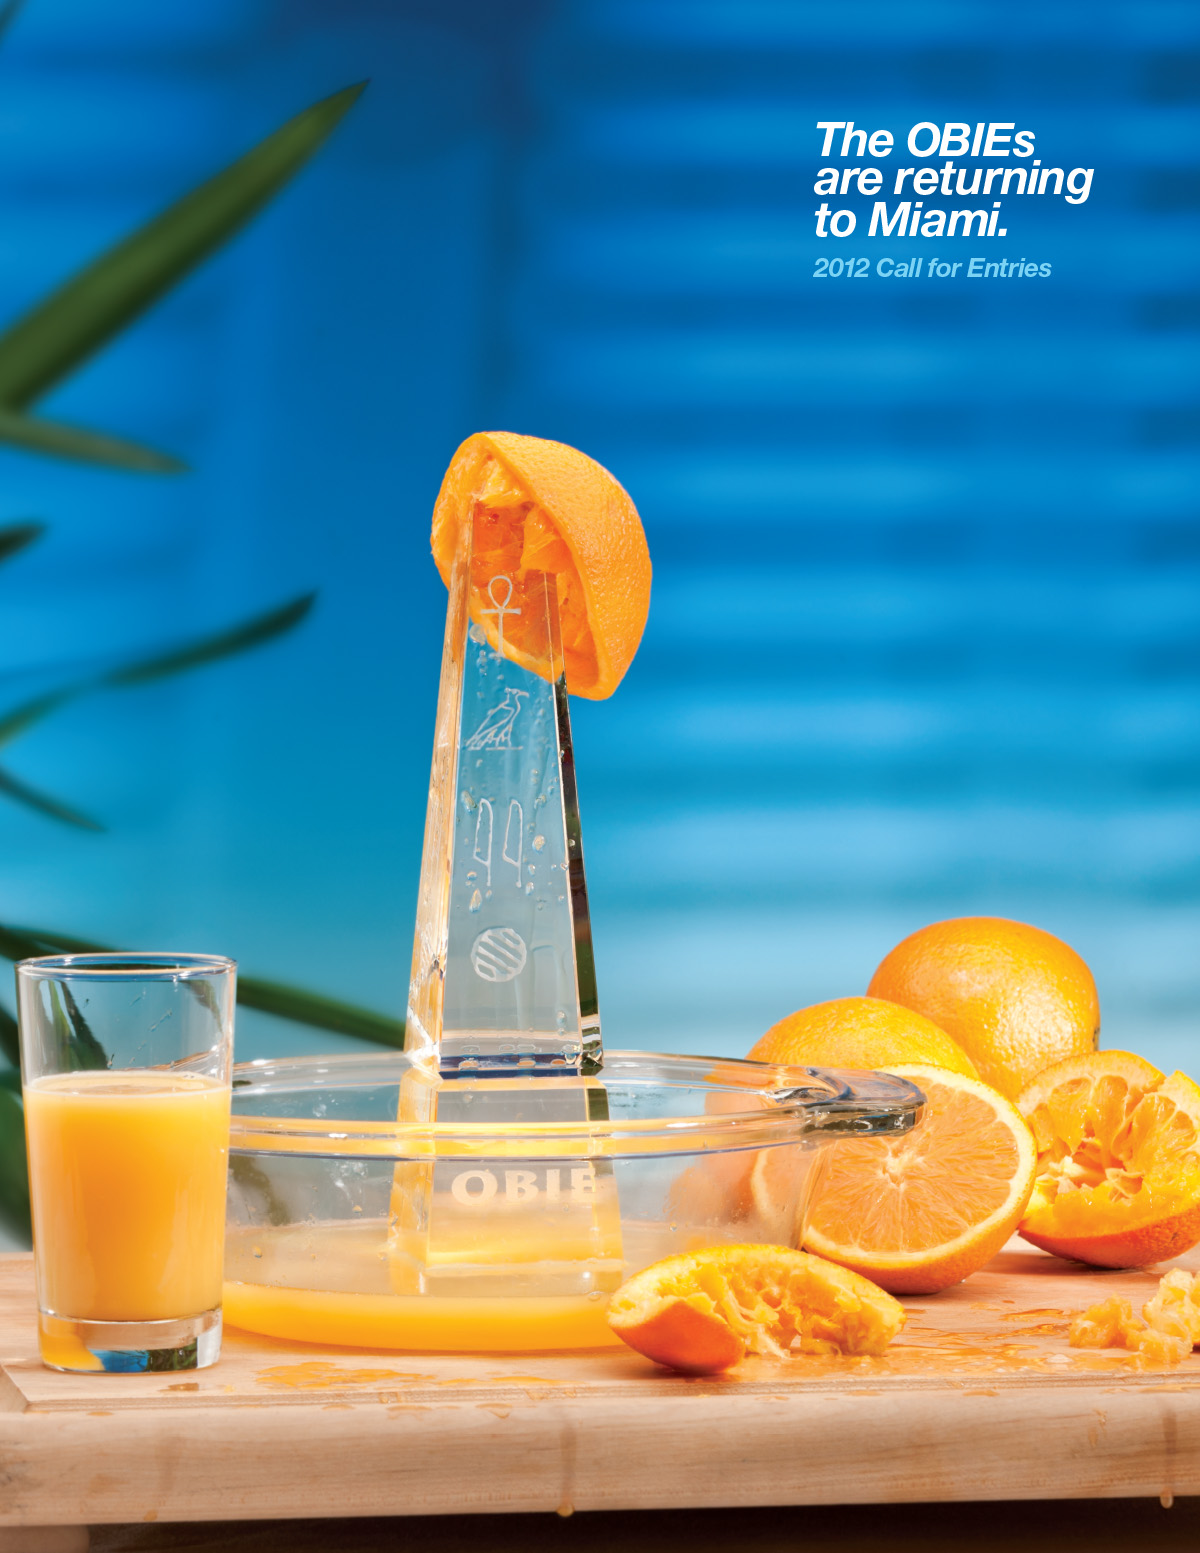 Print advertisement with OBIE award as orange juicer and headline "The OBIEs are returning to Miami"